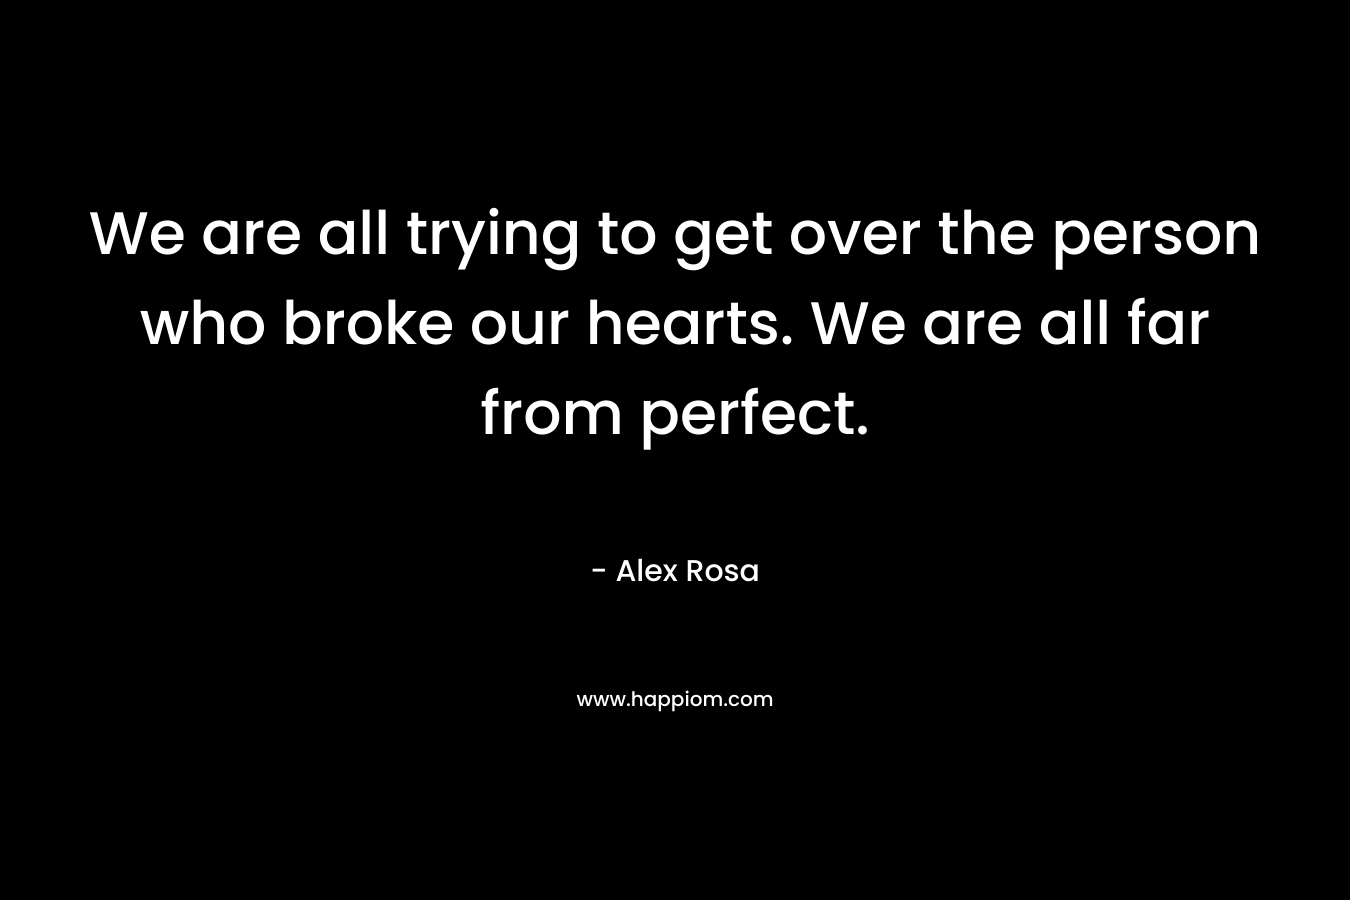 We are all trying to get over the person who broke our hearts. We are all far from perfect.